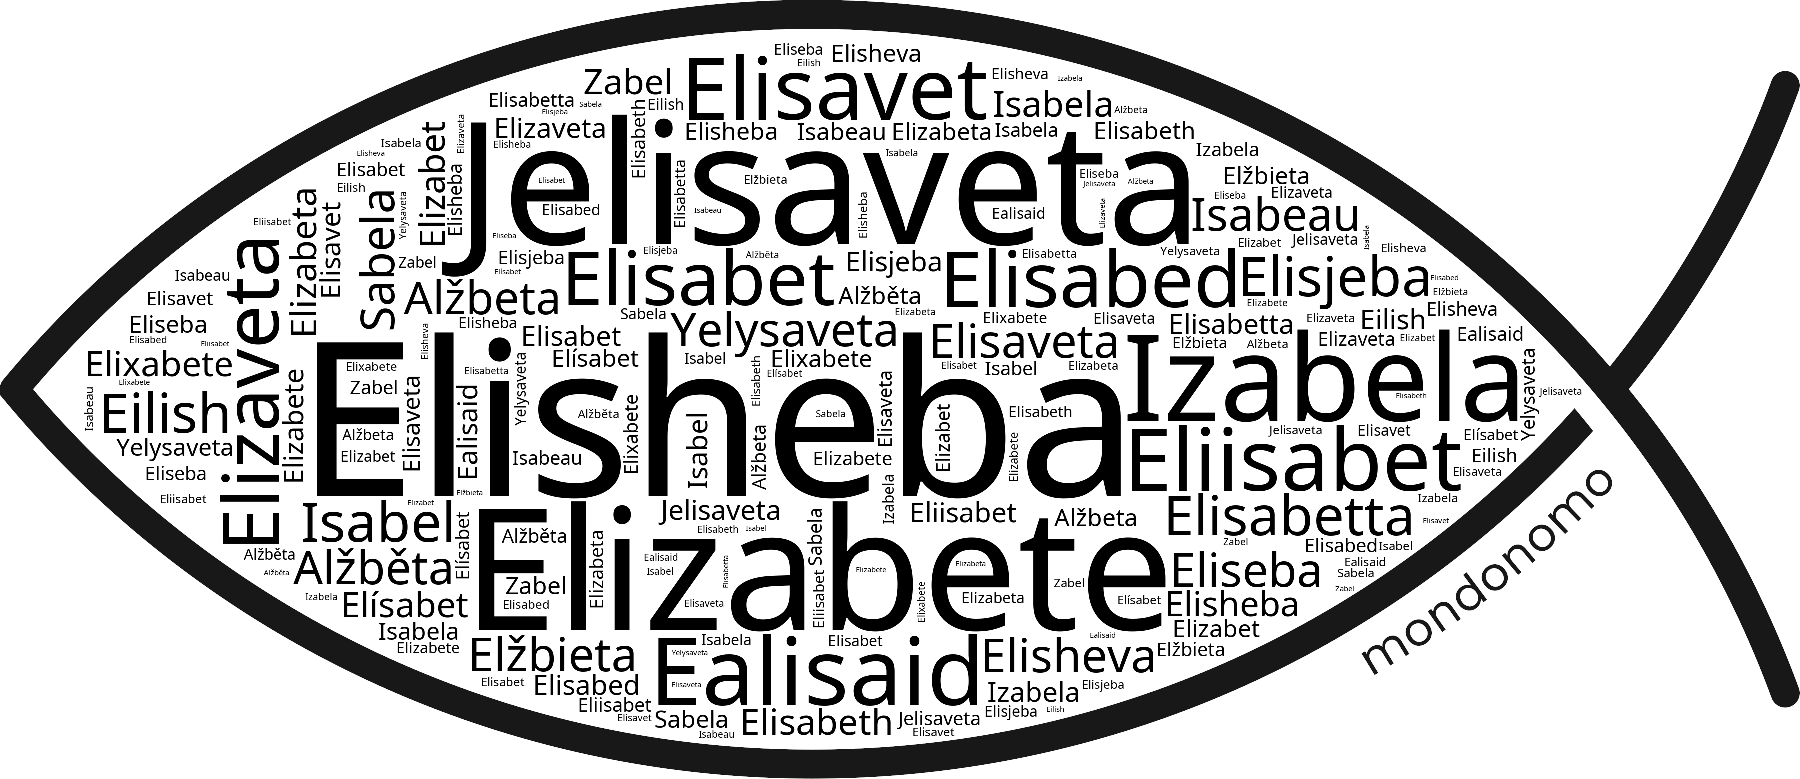 Name Elisheba in the world's Bibles